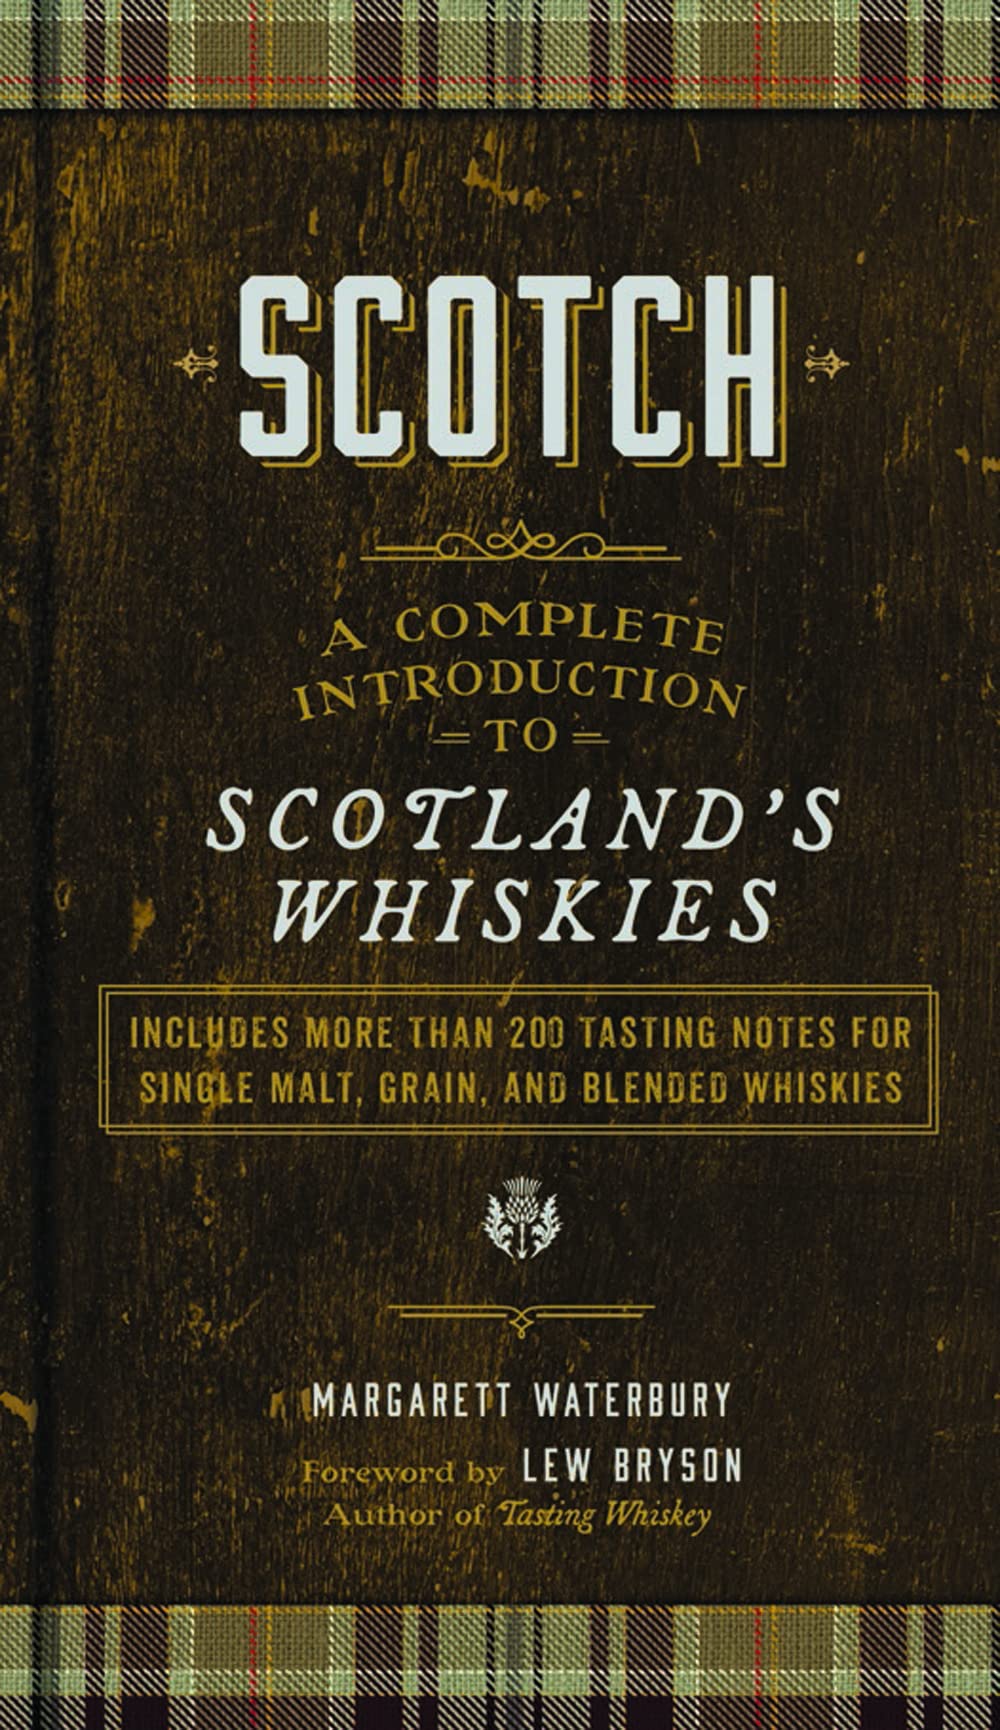 Scotch: A Complete Introduction to Scotlands Whiskies (Hardcover)